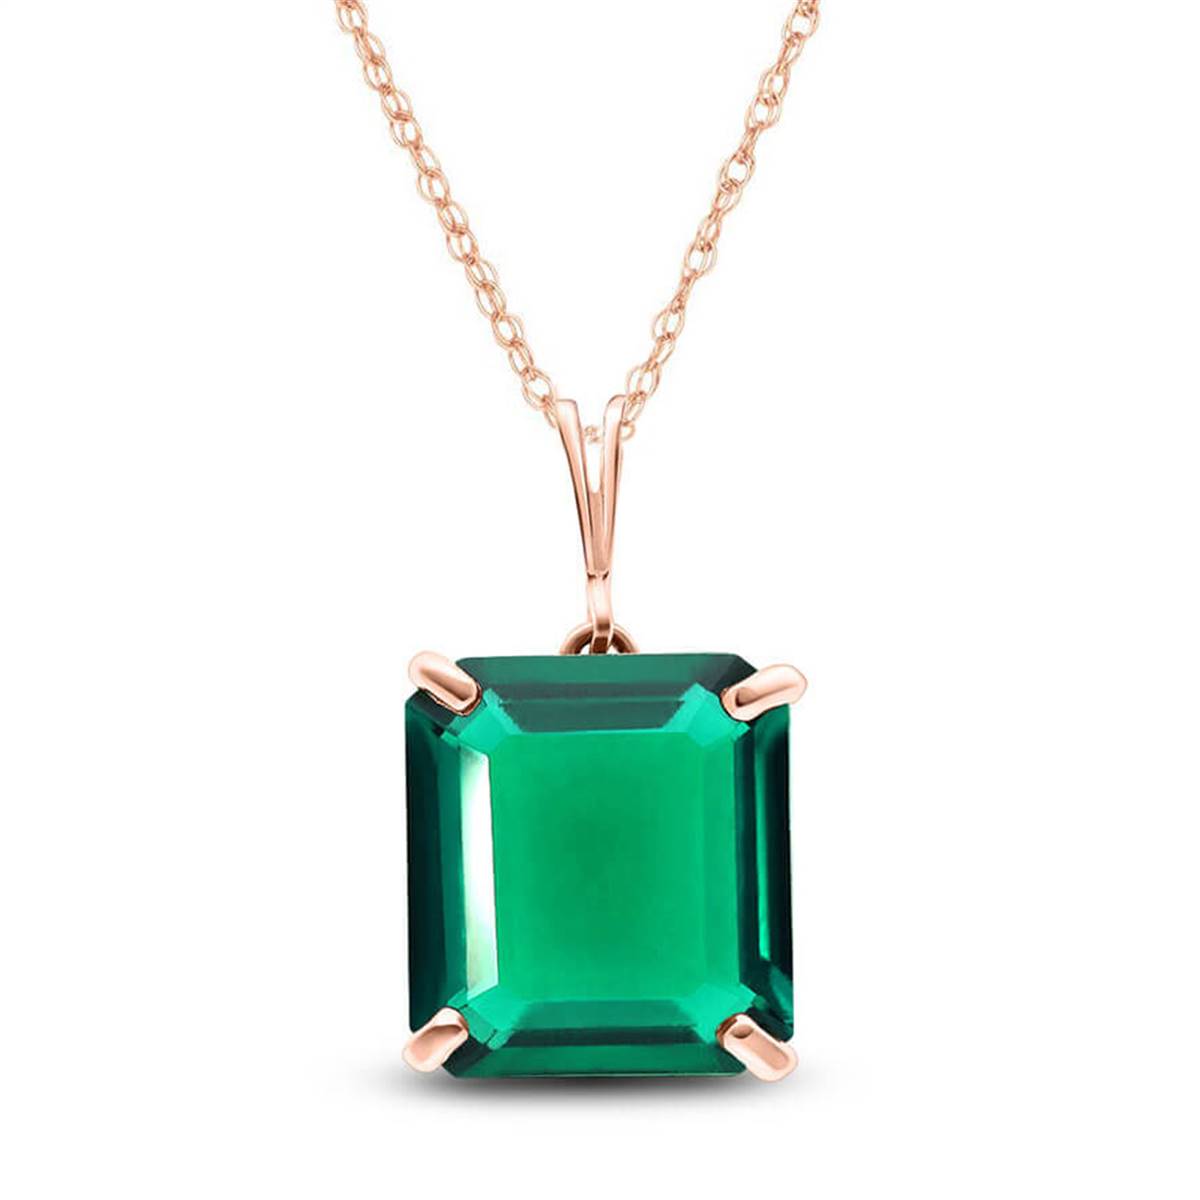 14K Solid Rose Gold Necklace With Octagon Shape 4.5 ctw High Polished Genuine Emerald - Grade AAA